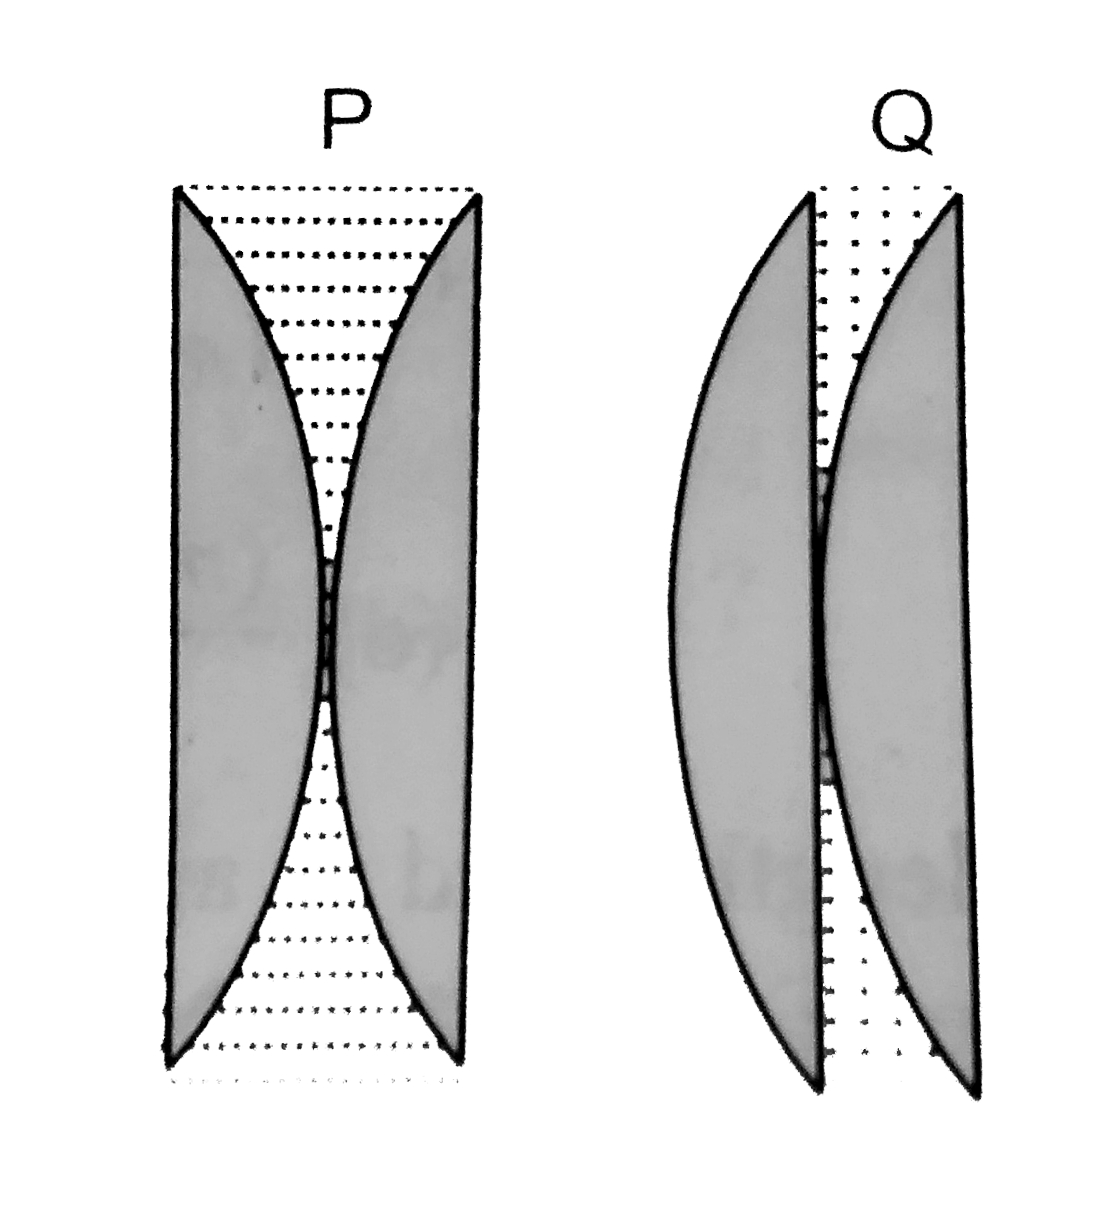 Two convex lenses of powers 4D and 6D are separated by a distance of (1)/(6)m . The power of the optical system so formed is